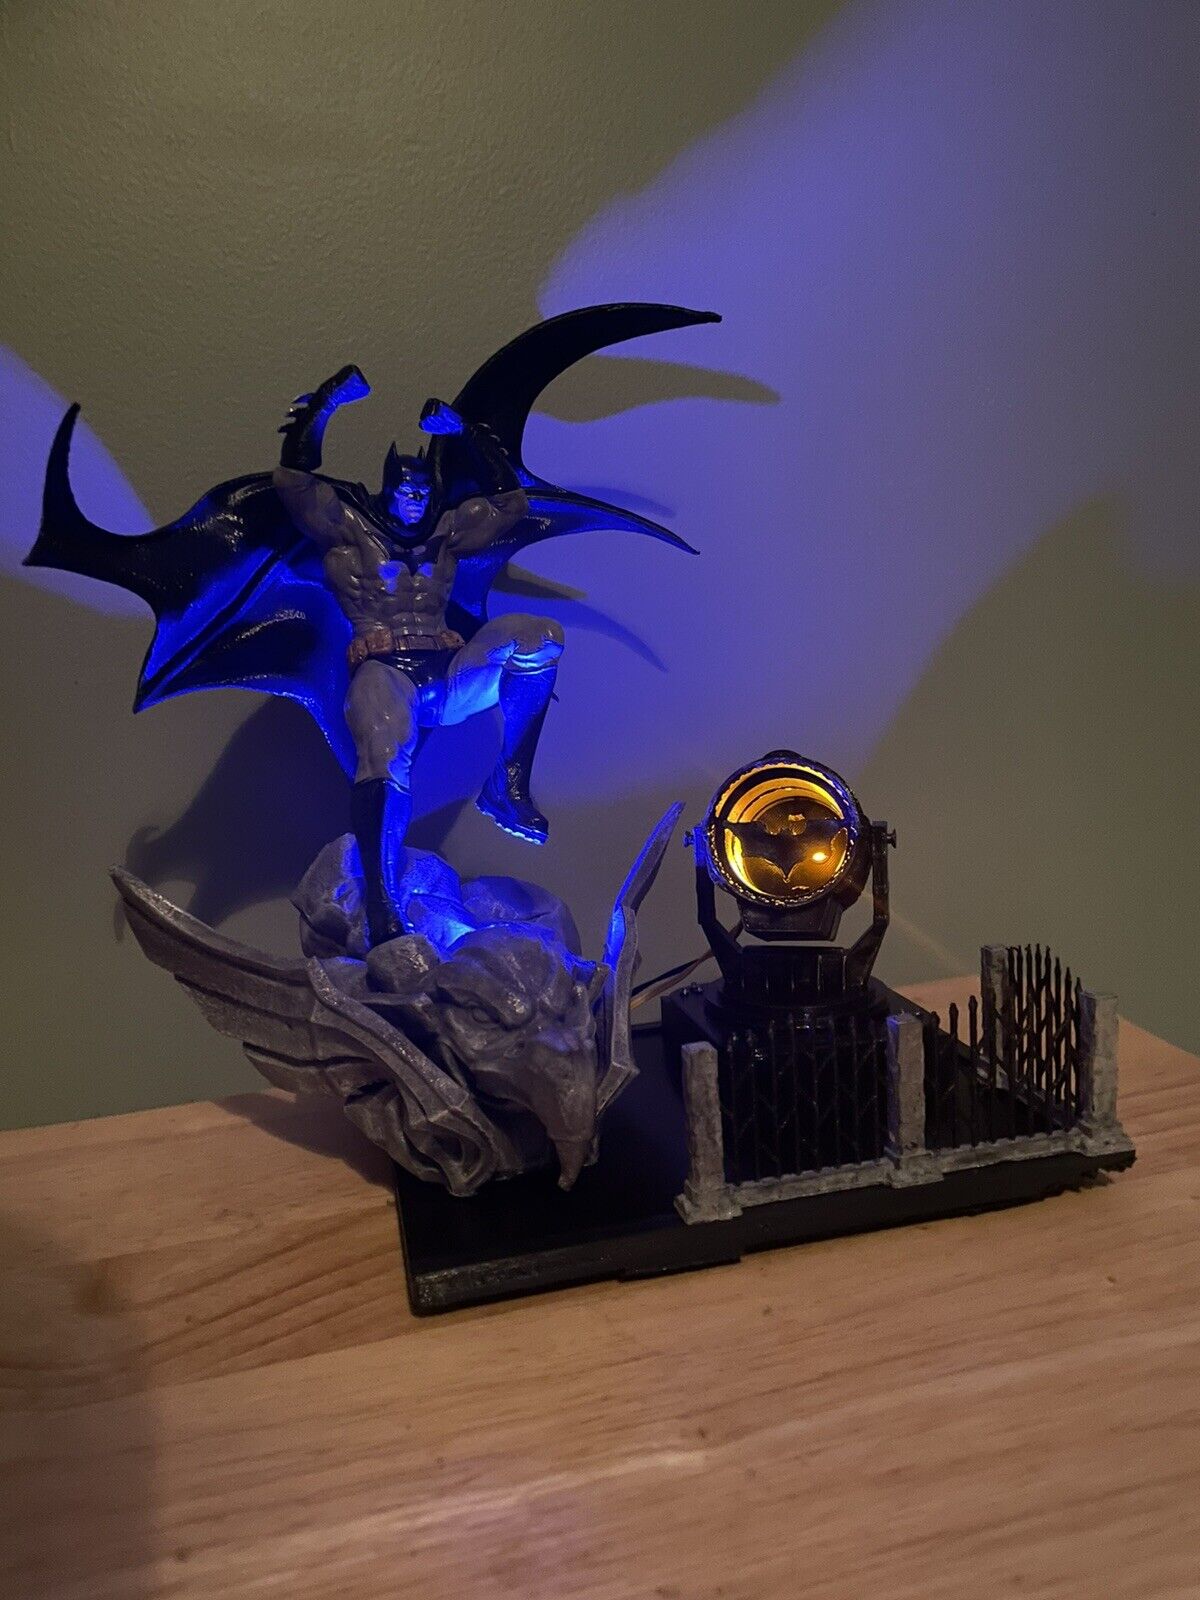 Batman Diorama Resin Printed Model Lighted Approx 12”tall X 10”wide X11”long